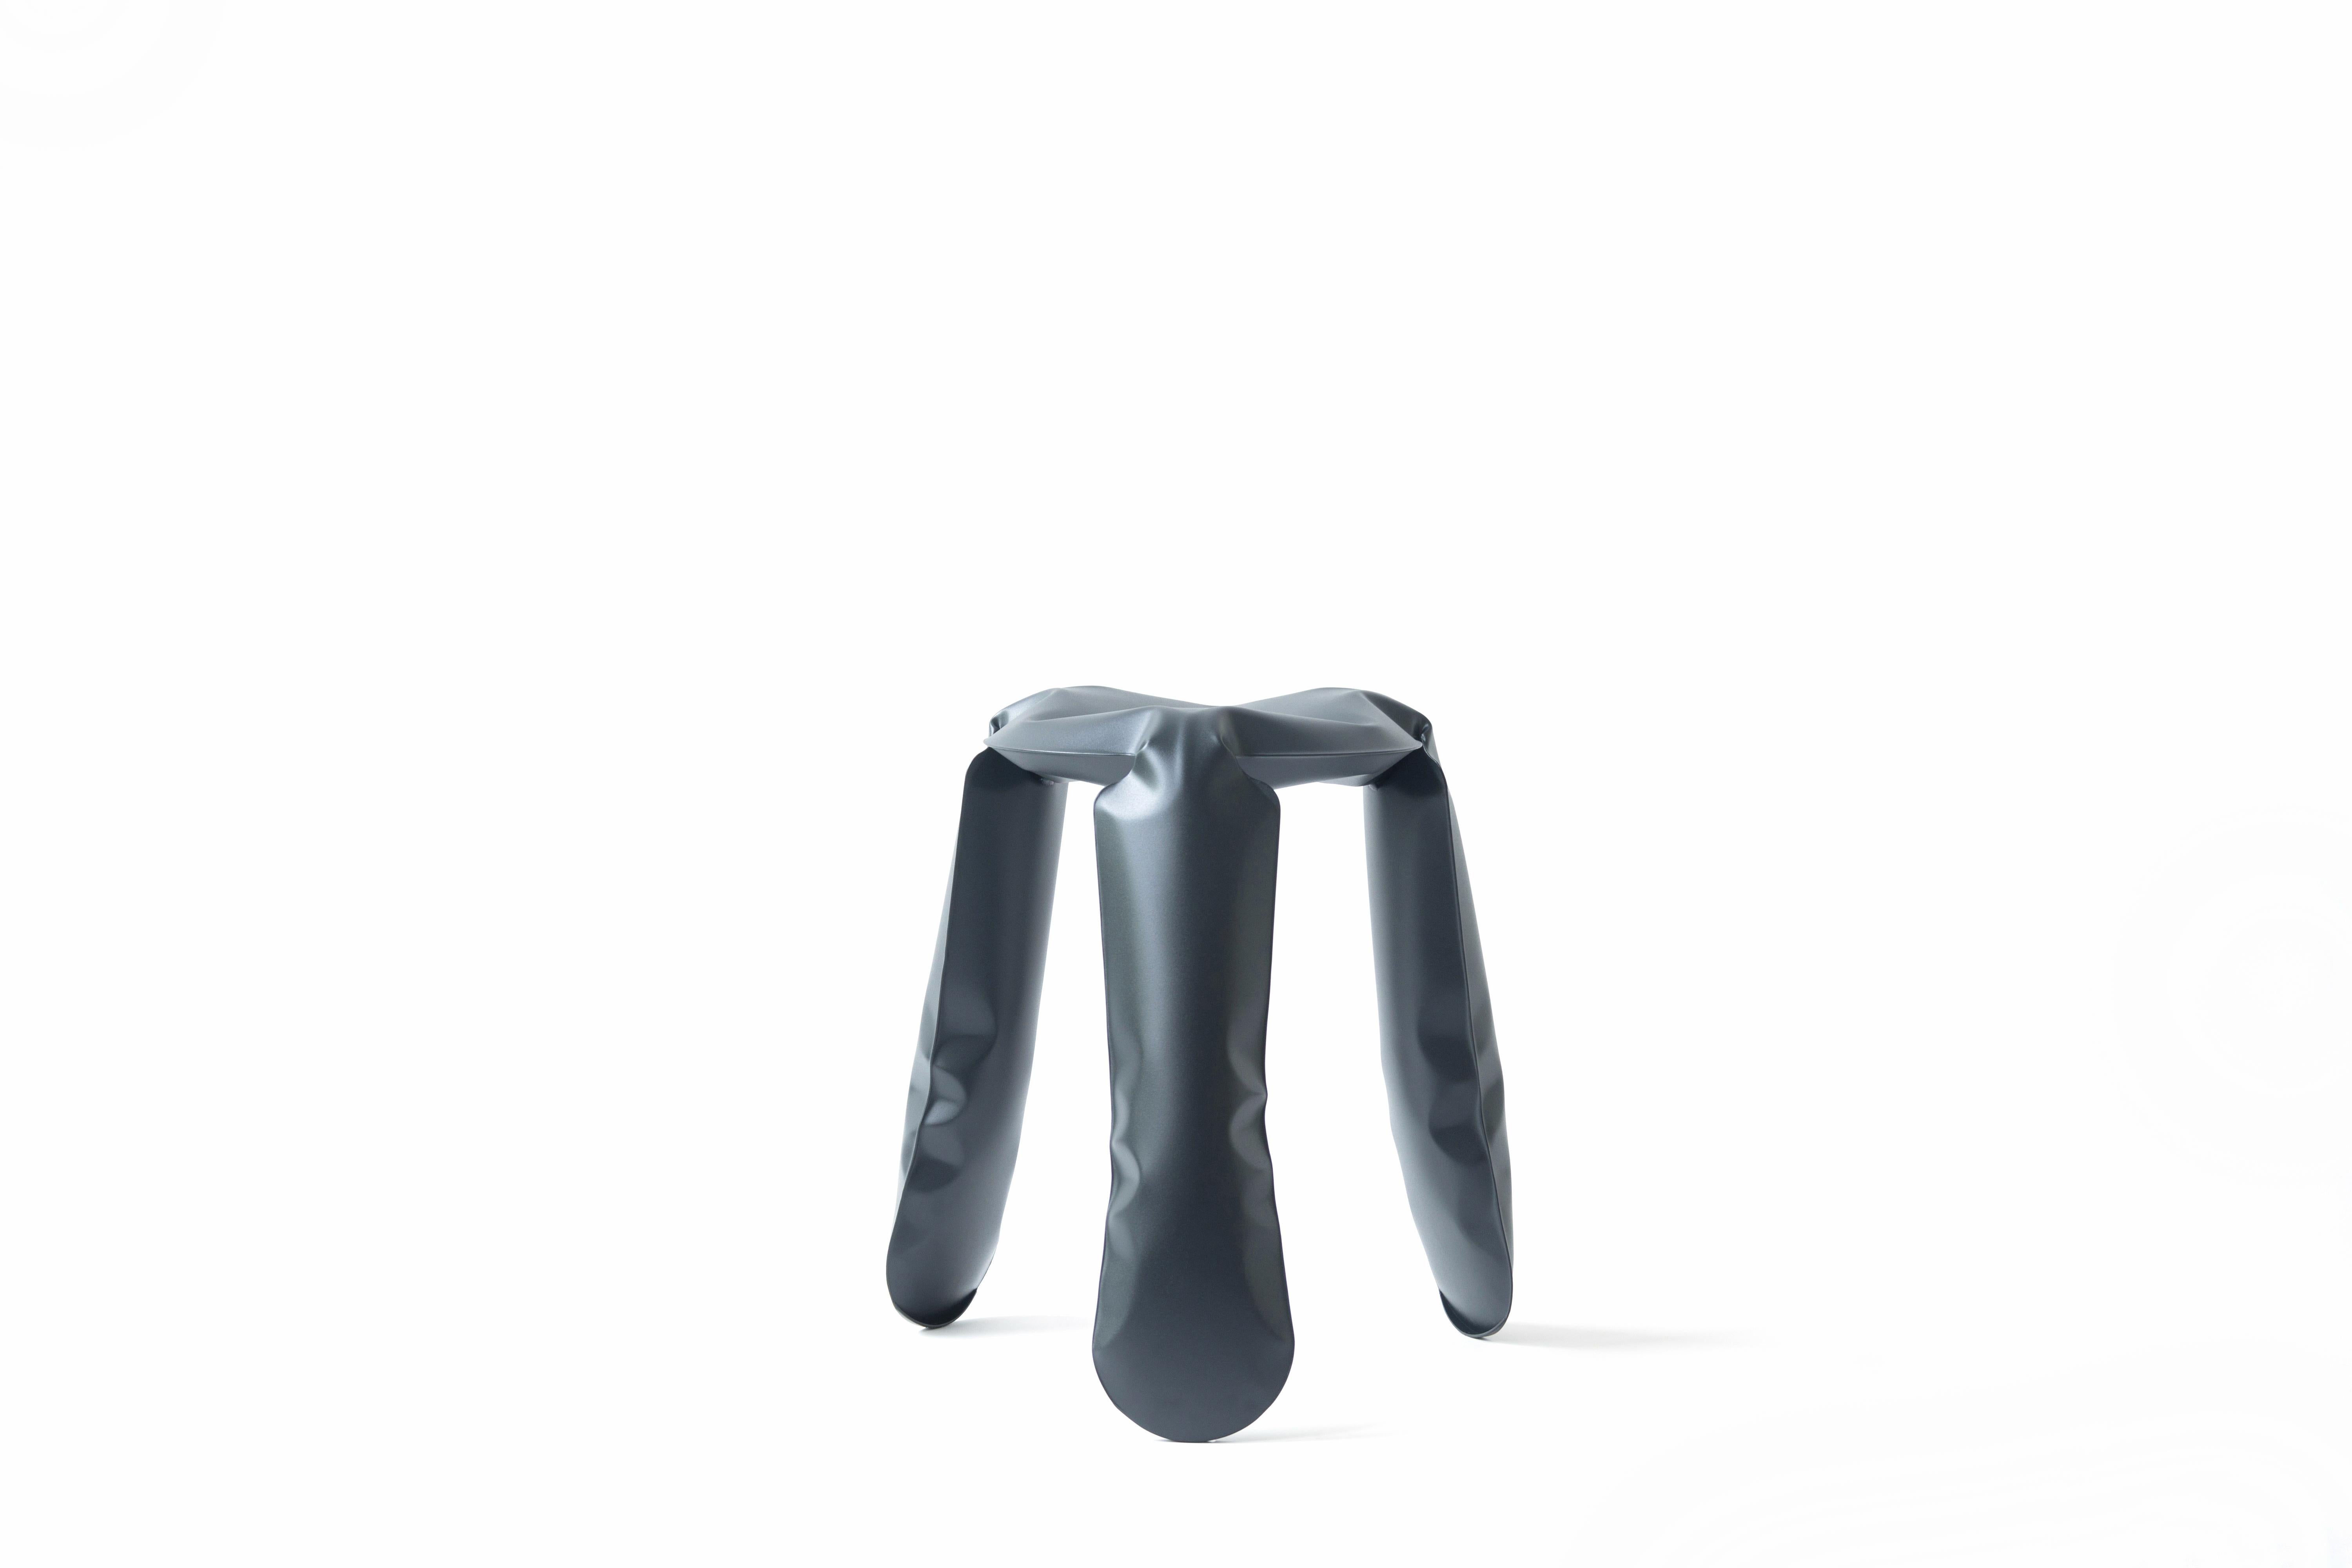 Graphite Steel Standard Plopp stool by Zieta
Dimensions: D 35 x H 50 cm 
Material: Carbon steel. 
Finish: Powder-coated. 
Available in colors: Graphite, Moss Grey, Umbra Grey, Beige Grey, Blue Grey. Available in Stainless Steel, Aluminum, and Carbon